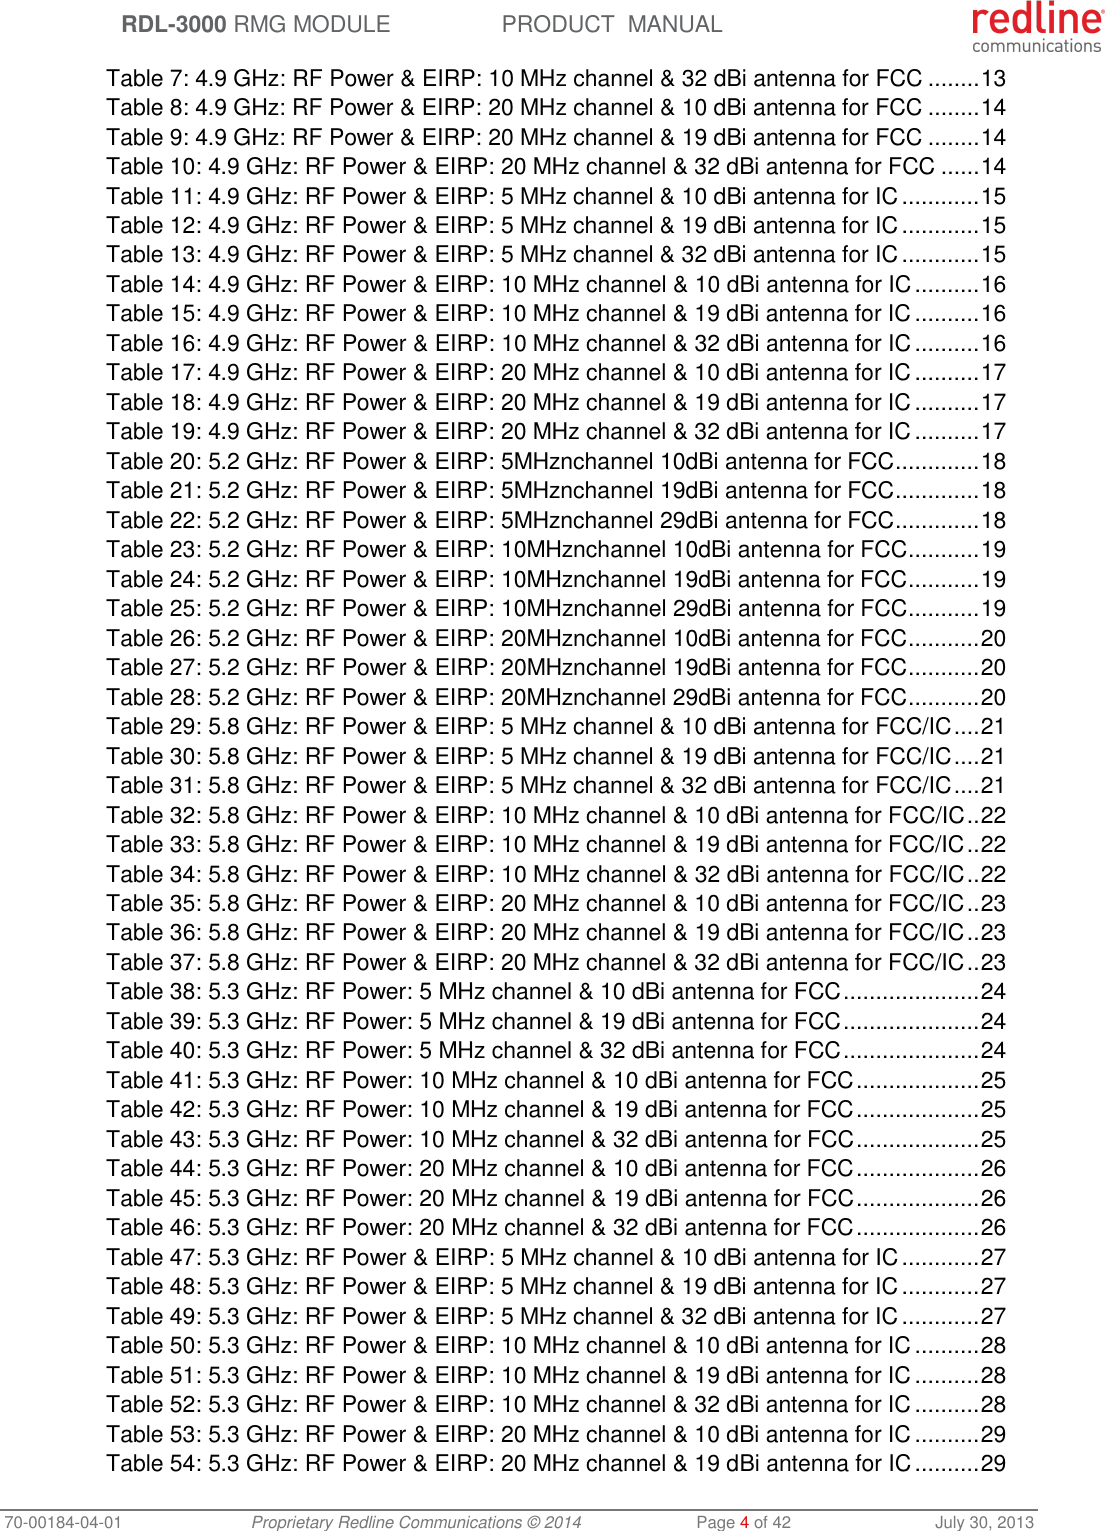  RDL-3000 RMG MODULE PRODUCT  MANUAL 70-00184-04-01 Proprietary Redline Communications © 2014  Page 4 of 42  July 30, 2013 Table 7: 4.9 GHz: RF Power &amp; EIRP: 10 MHz channel &amp; 32 dBi antenna for FCC ........ 13 Table 8: 4.9 GHz: RF Power &amp; EIRP: 20 MHz channel &amp; 10 dBi antenna for FCC ........ 14 Table 9: 4.9 GHz: RF Power &amp; EIRP: 20 MHz channel &amp; 19 dBi antenna for FCC ........ 14 Table 10: 4.9 GHz: RF Power &amp; EIRP: 20 MHz channel &amp; 32 dBi antenna for FCC ...... 14 Table 11: 4.9 GHz: RF Power &amp; EIRP: 5 MHz channel &amp; 10 dBi antenna for IC ............ 15 Table 12: 4.9 GHz: RF Power &amp; EIRP: 5 MHz channel &amp; 19 dBi antenna for IC ............ 15 Table 13: 4.9 GHz: RF Power &amp; EIRP: 5 MHz channel &amp; 32 dBi antenna for IC ............ 15 Table 14: 4.9 GHz: RF Power &amp; EIRP: 10 MHz channel &amp; 10 dBi antenna for IC .......... 16 Table 15: 4.9 GHz: RF Power &amp; EIRP: 10 MHz channel &amp; 19 dBi antenna for IC .......... 16 Table 16: 4.9 GHz: RF Power &amp; EIRP: 10 MHz channel &amp; 32 dBi antenna for IC .......... 16 Table 17: 4.9 GHz: RF Power &amp; EIRP: 20 MHz channel &amp; 10 dBi antenna for IC .......... 17 Table 18: 4.9 GHz: RF Power &amp; EIRP: 20 MHz channel &amp; 19 dBi antenna for IC .......... 17 Table 19: 4.9 GHz: RF Power &amp; EIRP: 20 MHz channel &amp; 32 dBi antenna for IC .......... 17 Table 20: 5.2 GHz: RF Power &amp; EIRP: 5MHznchannel 10dBi antenna for FCC ............. 18 Table 21: 5.2 GHz: RF Power &amp; EIRP: 5MHznchannel 19dBi antenna for FCC ............. 18 Table 22: 5.2 GHz: RF Power &amp; EIRP: 5MHznchannel 29dBi antenna for FCC ............. 18 Table 23: 5.2 GHz: RF Power &amp; EIRP: 10MHznchannel 10dBi antenna for FCC ........... 19 Table 24: 5.2 GHz: RF Power &amp; EIRP: 10MHznchannel 19dBi antenna for FCC ........... 19 Table 25: 5.2 GHz: RF Power &amp; EIRP: 10MHznchannel 29dBi antenna for FCC ........... 19 Table 26: 5.2 GHz: RF Power &amp; EIRP: 20MHznchannel 10dBi antenna for FCC ........... 20 Table 27: 5.2 GHz: RF Power &amp; EIRP: 20MHznchannel 19dBi antenna for FCC ........... 20 Table 28: 5.2 GHz: RF Power &amp; EIRP: 20MHznchannel 29dBi antenna for FCC ........... 20 Table 29: 5.8 GHz: RF Power &amp; EIRP: 5 MHz channel &amp; 10 dBi antenna for FCC/IC .... 21 Table 30: 5.8 GHz: RF Power &amp; EIRP: 5 MHz channel &amp; 19 dBi antenna for FCC/IC .... 21 Table 31: 5.8 GHz: RF Power &amp; EIRP: 5 MHz channel &amp; 32 dBi antenna for FCC/IC .... 21 Table 32: 5.8 GHz: RF Power &amp; EIRP: 10 MHz channel &amp; 10 dBi antenna for FCC/IC .. 22 Table 33: 5.8 GHz: RF Power &amp; EIRP: 10 MHz channel &amp; 19 dBi antenna for FCC/IC .. 22 Table 34: 5.8 GHz: RF Power &amp; EIRP: 10 MHz channel &amp; 32 dBi antenna for FCC/IC .. 22 Table 35: 5.8 GHz: RF Power &amp; EIRP: 20 MHz channel &amp; 10 dBi antenna for FCC/IC .. 23 Table 36: 5.8 GHz: RF Power &amp; EIRP: 20 MHz channel &amp; 19 dBi antenna for FCC/IC .. 23 Table 37: 5.8 GHz: RF Power &amp; EIRP: 20 MHz channel &amp; 32 dBi antenna for FCC/IC .. 23 Table 38: 5.3 GHz: RF Power: 5 MHz channel &amp; 10 dBi antenna for FCC ..................... 24 Table 39: 5.3 GHz: RF Power: 5 MHz channel &amp; 19 dBi antenna for FCC ..................... 24 Table 40: 5.3 GHz: RF Power: 5 MHz channel &amp; 32 dBi antenna for FCC ..................... 24 Table 41: 5.3 GHz: RF Power: 10 MHz channel &amp; 10 dBi antenna for FCC ................... 25 Table 42: 5.3 GHz: RF Power: 10 MHz channel &amp; 19 dBi antenna for FCC ................... 25 Table 43: 5.3 GHz: RF Power: 10 MHz channel &amp; 32 dBi antenna for FCC ................... 25 Table 44: 5.3 GHz: RF Power: 20 MHz channel &amp; 10 dBi antenna for FCC ................... 26 Table 45: 5.3 GHz: RF Power: 20 MHz channel &amp; 19 dBi antenna for FCC ................... 26 Table 46: 5.3 GHz: RF Power: 20 MHz channel &amp; 32 dBi antenna for FCC ................... 26 Table 47: 5.3 GHz: RF Power &amp; EIRP: 5 MHz channel &amp; 10 dBi antenna for IC ............ 27 Table 48: 5.3 GHz: RF Power &amp; EIRP: 5 MHz channel &amp; 19 dBi antenna for IC ............ 27 Table 49: 5.3 GHz: RF Power &amp; EIRP: 5 MHz channel &amp; 32 dBi antenna for IC ............ 27 Table 50: 5.3 GHz: RF Power &amp; EIRP: 10 MHz channel &amp; 10 dBi antenna for IC .......... 28 Table 51: 5.3 GHz: RF Power &amp; EIRP: 10 MHz channel &amp; 19 dBi antenna for IC .......... 28 Table 52: 5.3 GHz: RF Power &amp; EIRP: 10 MHz channel &amp; 32 dBi antenna for IC .......... 28 Table 53: 5.3 GHz: RF Power &amp; EIRP: 20 MHz channel &amp; 10 dBi antenna for IC .......... 29 Table 54: 5.3 GHz: RF Power &amp; EIRP: 20 MHz channel &amp; 19 dBi antenna for IC .......... 29 